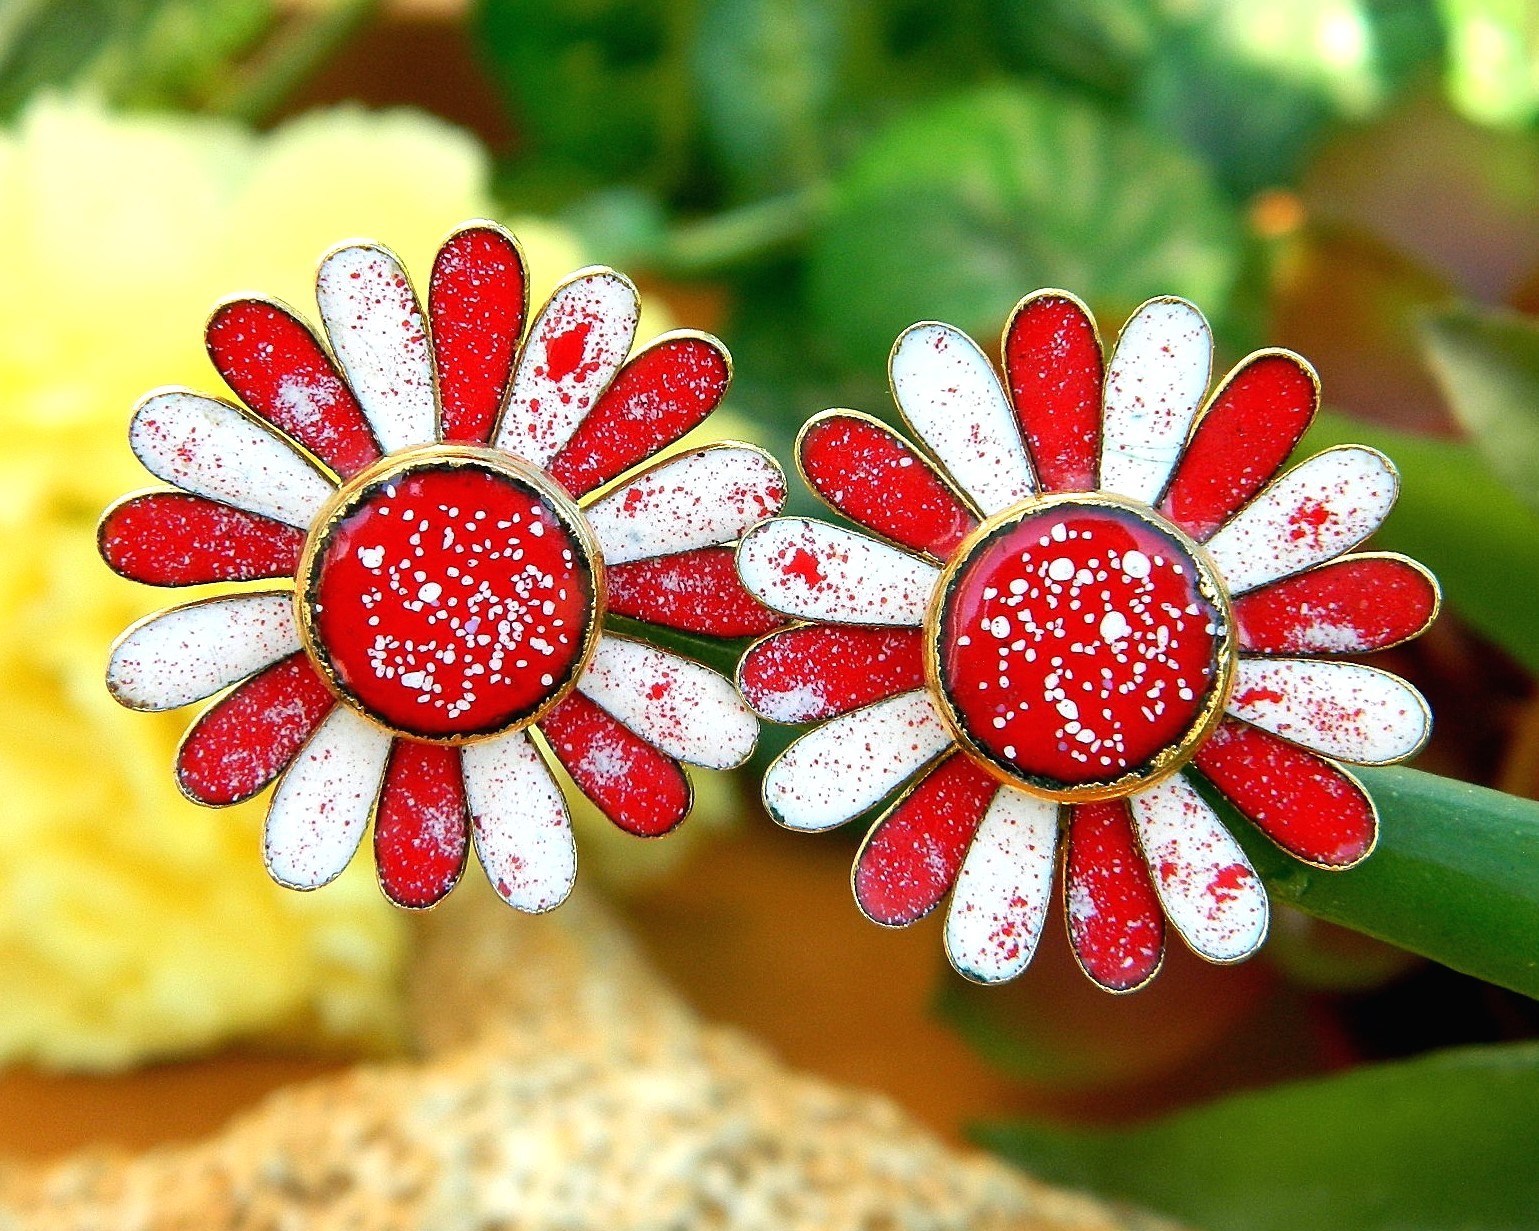 Primary image for Vintage Metal Earrings Enamel Daisy Flower Red White Speckles Clip-Ons